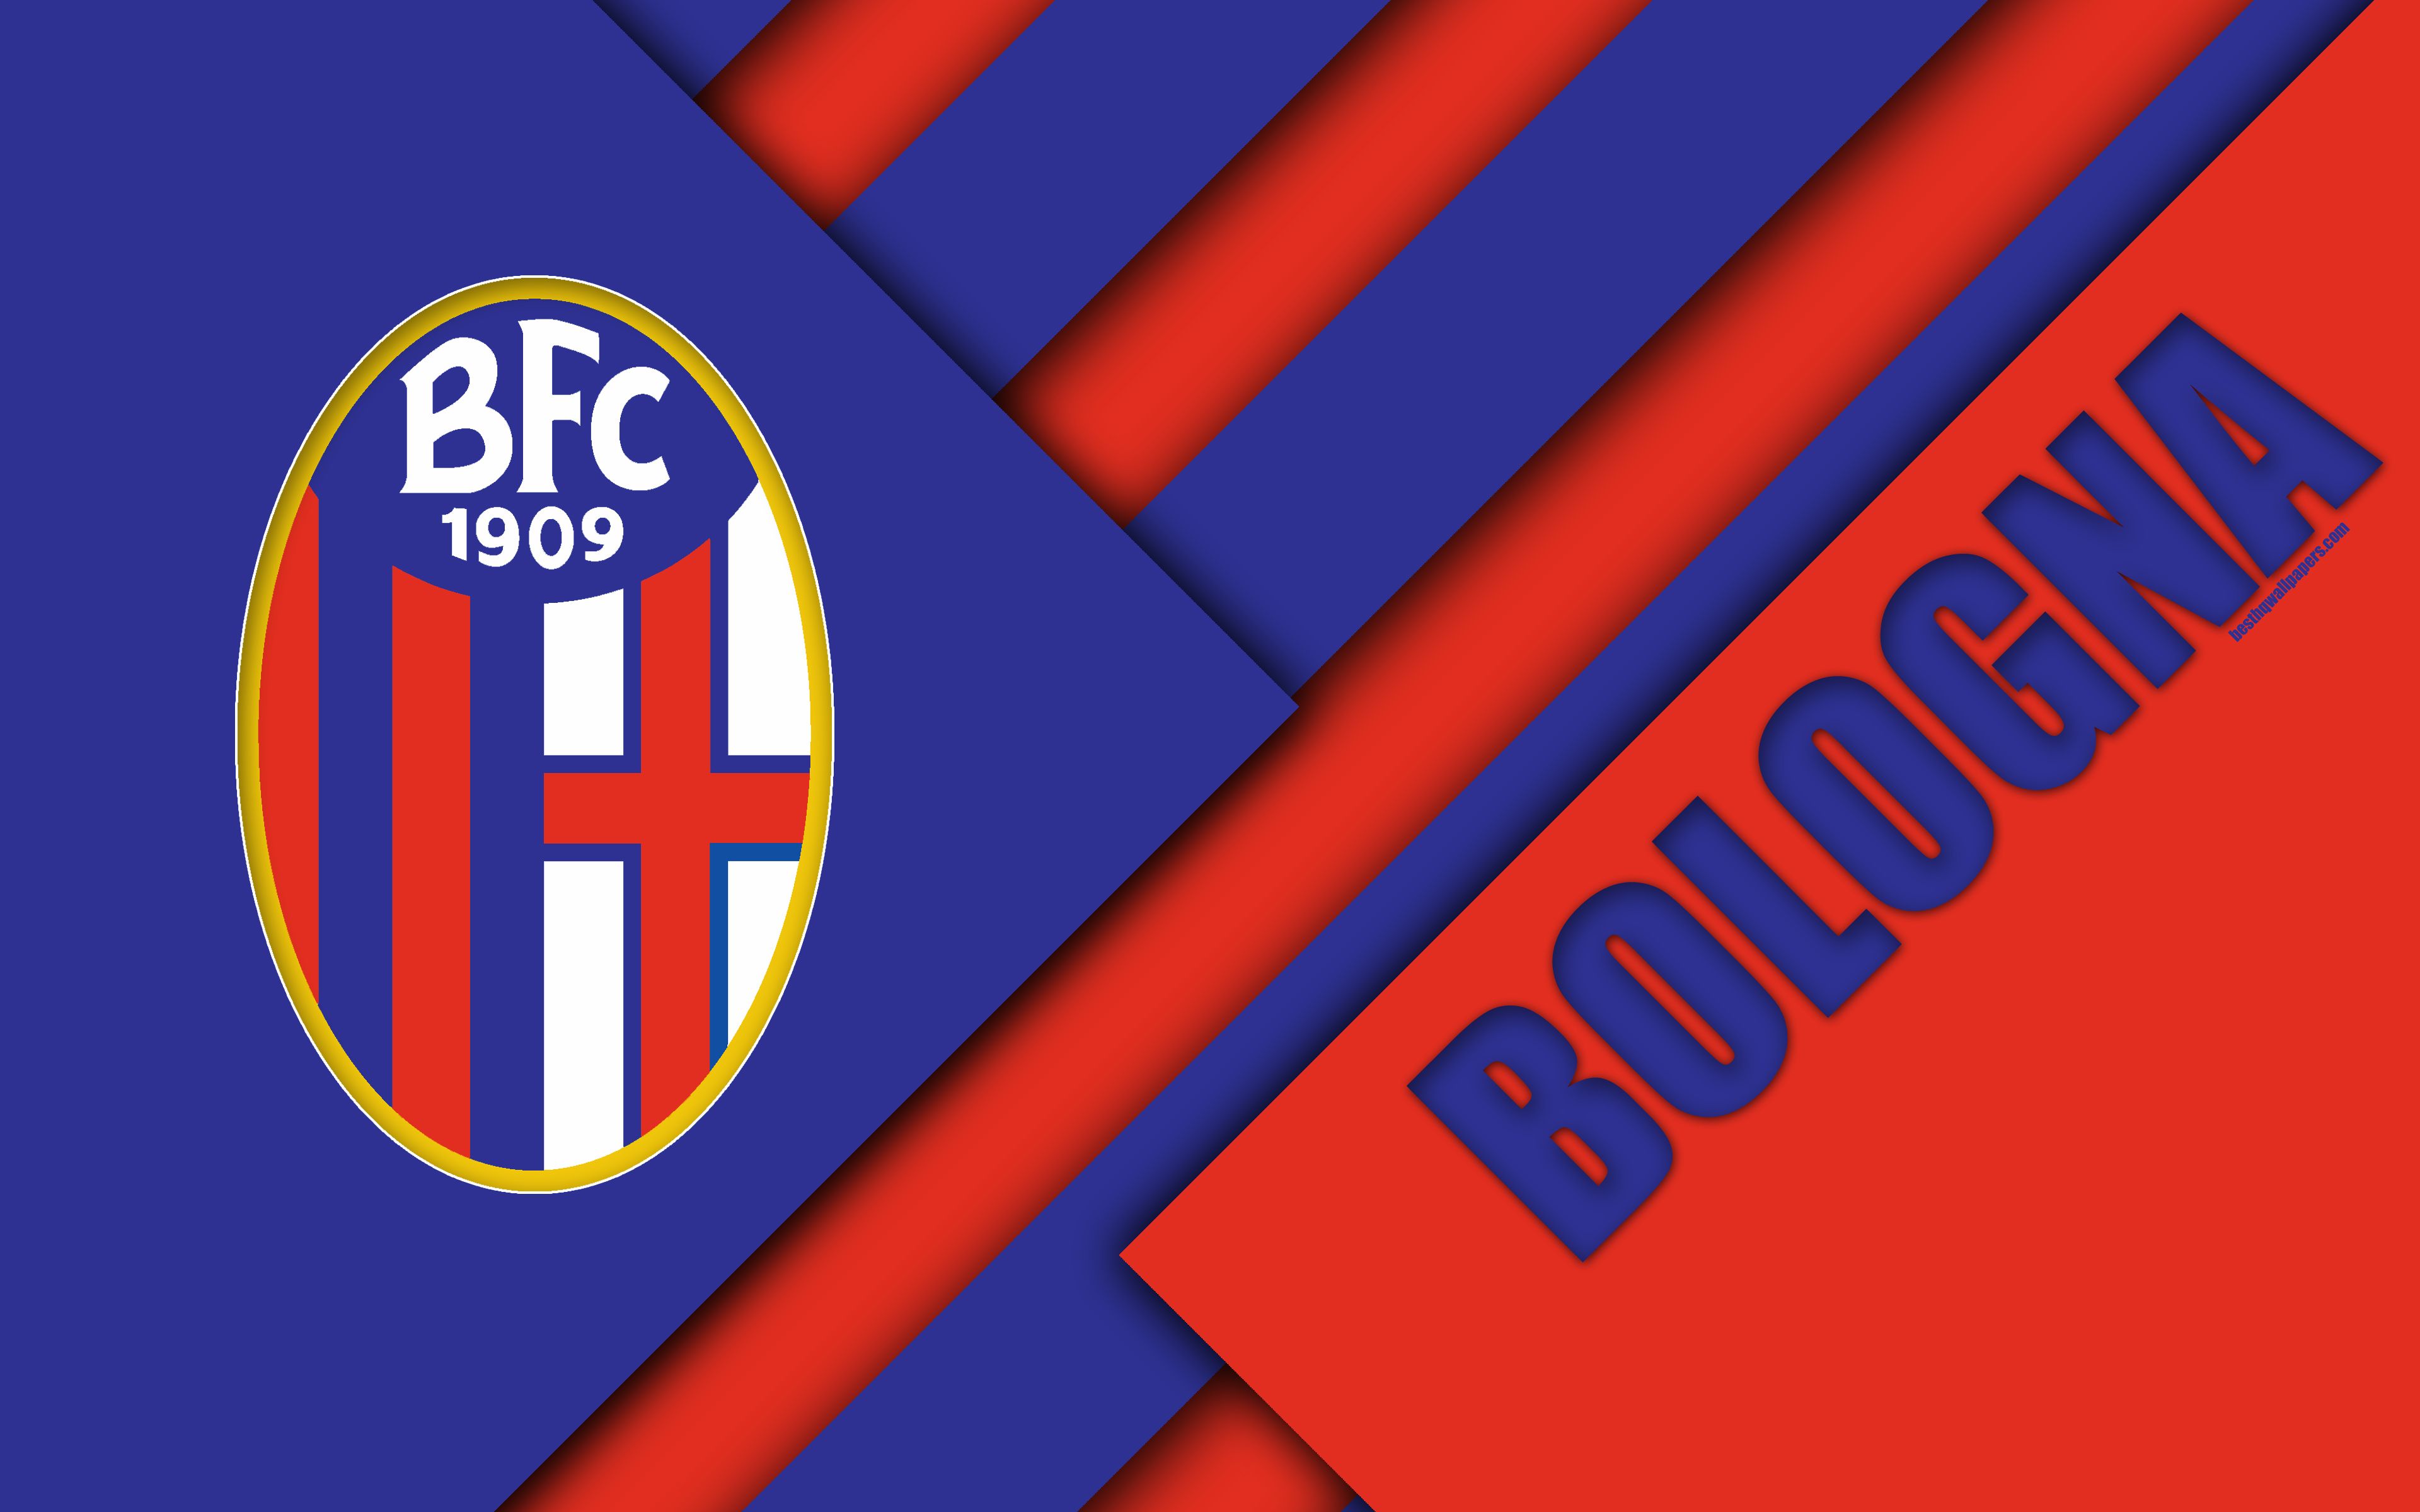 Download wallpaper Bologna FC, logo, 4k, material design, football, Serie A, Bologna, Italy, red blue abstraction, Italian football club for desktop with resolution 3840x2400. High Quality HD picture wallpaper